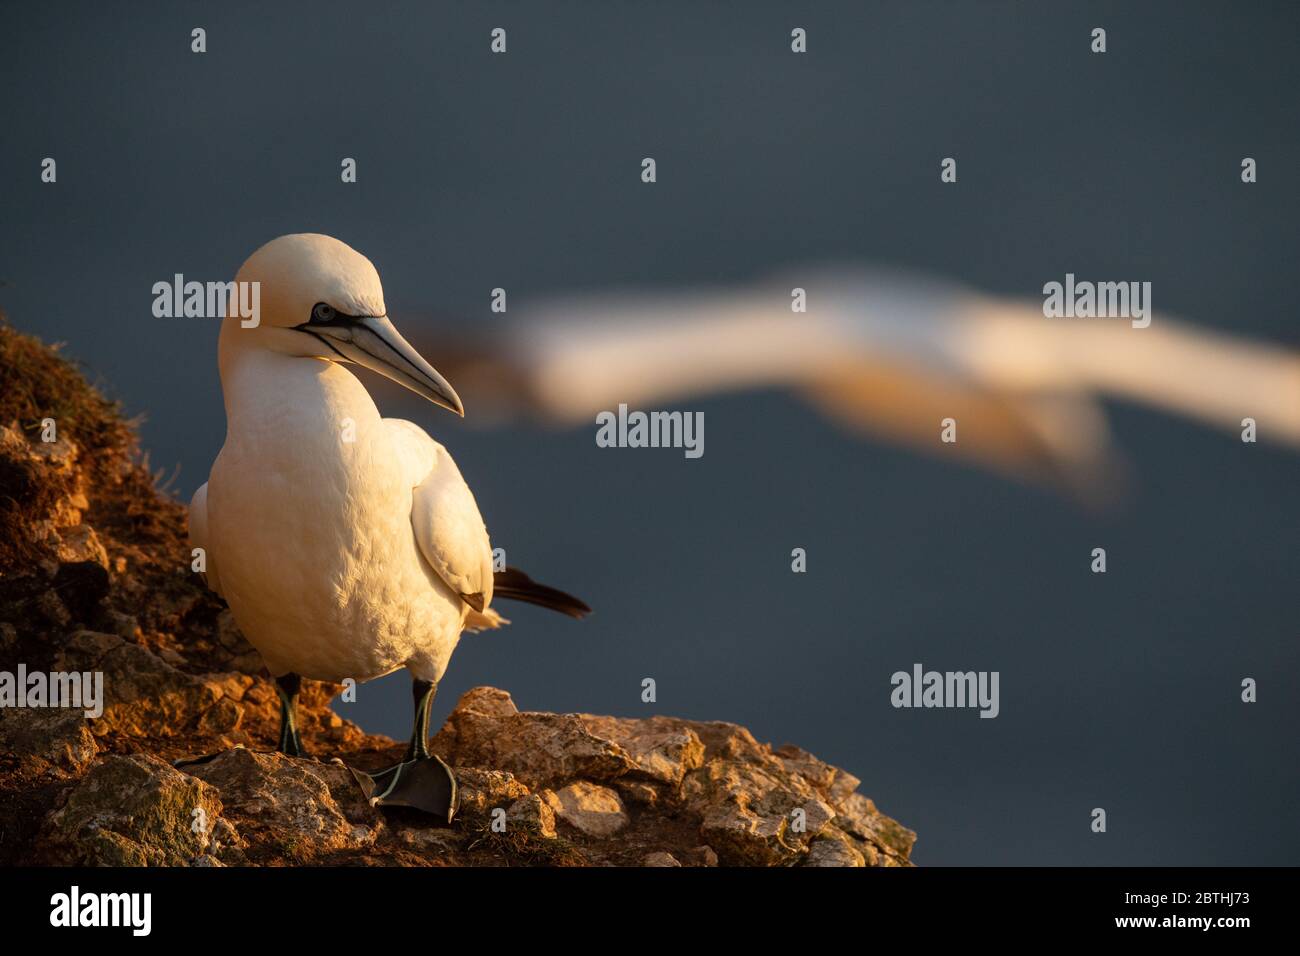 A Gannet nests on Bempton Cliffs on July 9, 2019 near Bridlington, England. Thousands of seabirds, including gannets, migrate in from warmer climates to nest on the chalk cliffs at Bempton in North Yorkshire, where they will spend the summer breeding and rearing their young. Over 20,000 Gannets - that pair for life and can live for over 20 years - make up the quarter of a million seabirds that return to nest each summer on these 100 meter high chalk cliffs. The Gannets that nest on the Bempton Cliffs RSPB reserve make up what is the biggest breeding colony on the UK mainland. Stock Photo